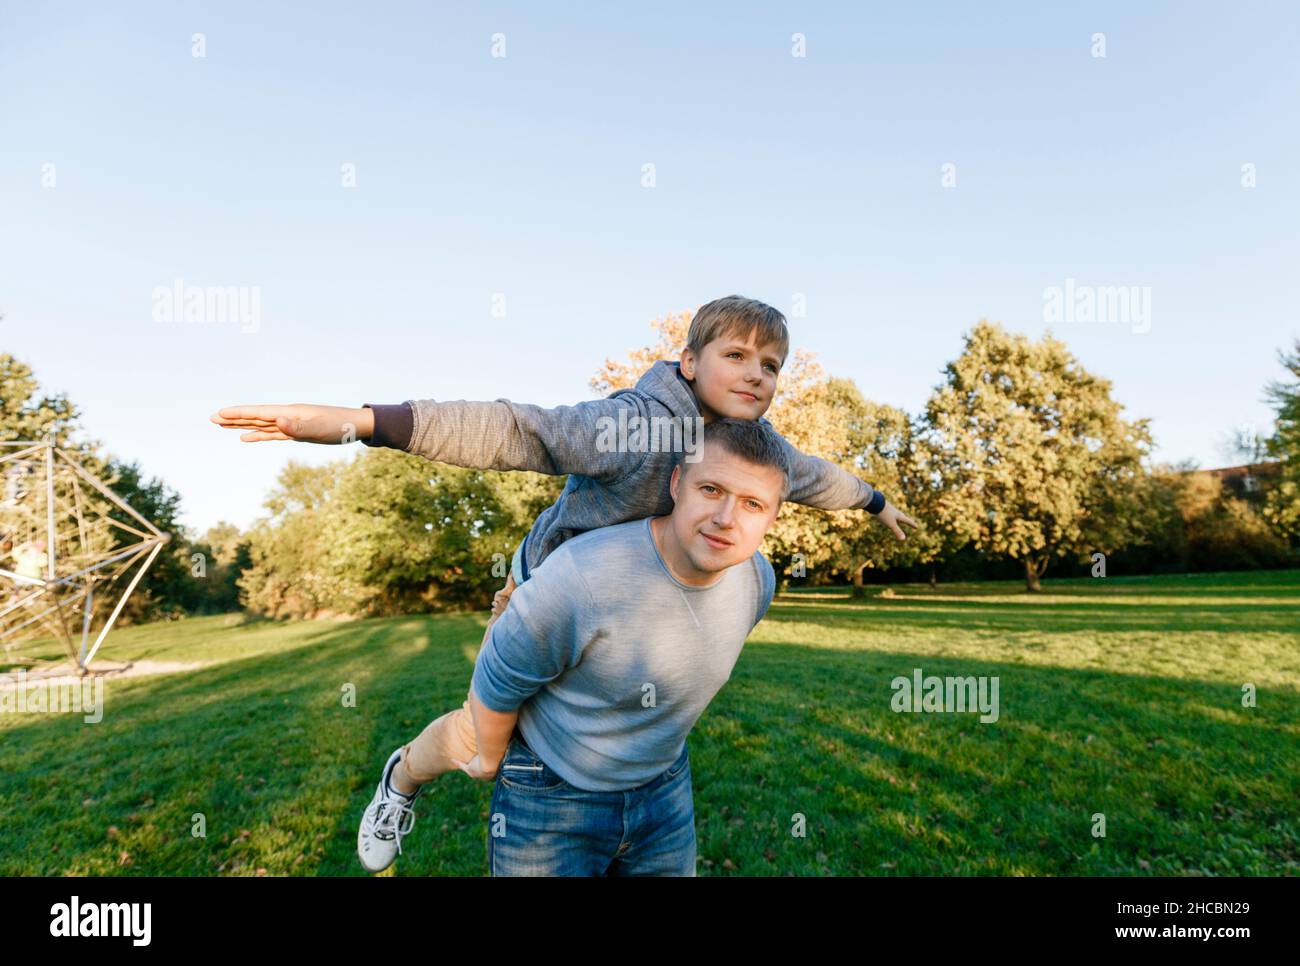 Man playing with blond son at park Stock Photo